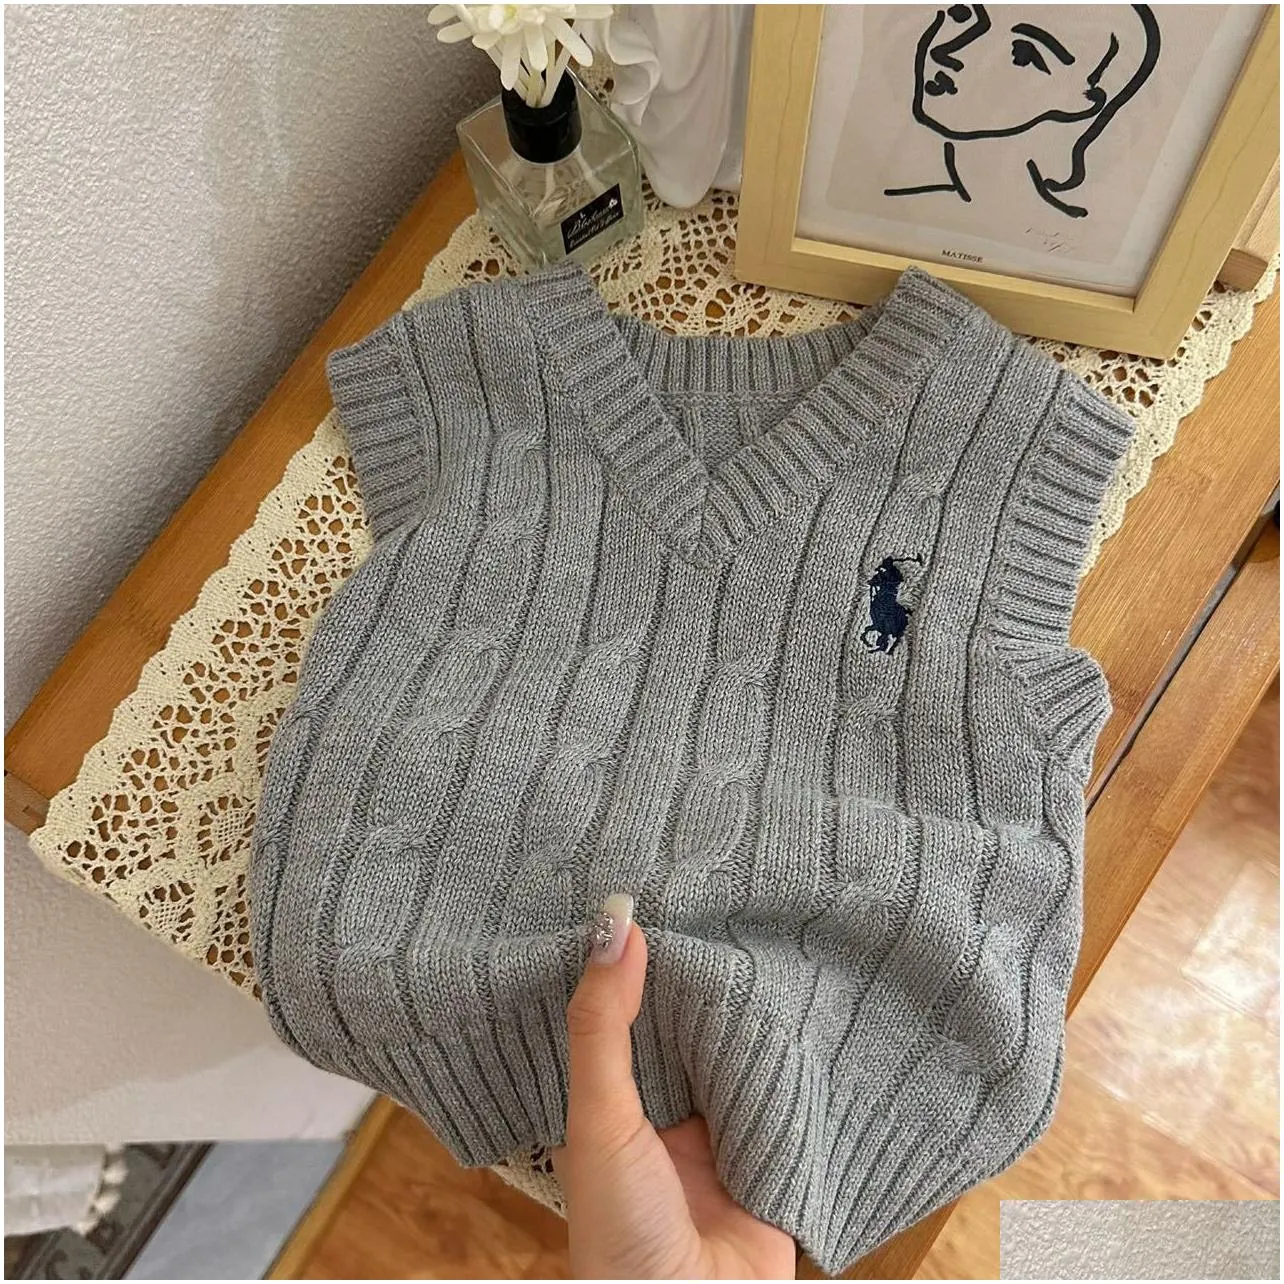 Children Sweater Vest Thick Needle Sleeveless Pullover V-Neck Knitting Sweater Tops Thread Trimming Boys Sweater 2-7T